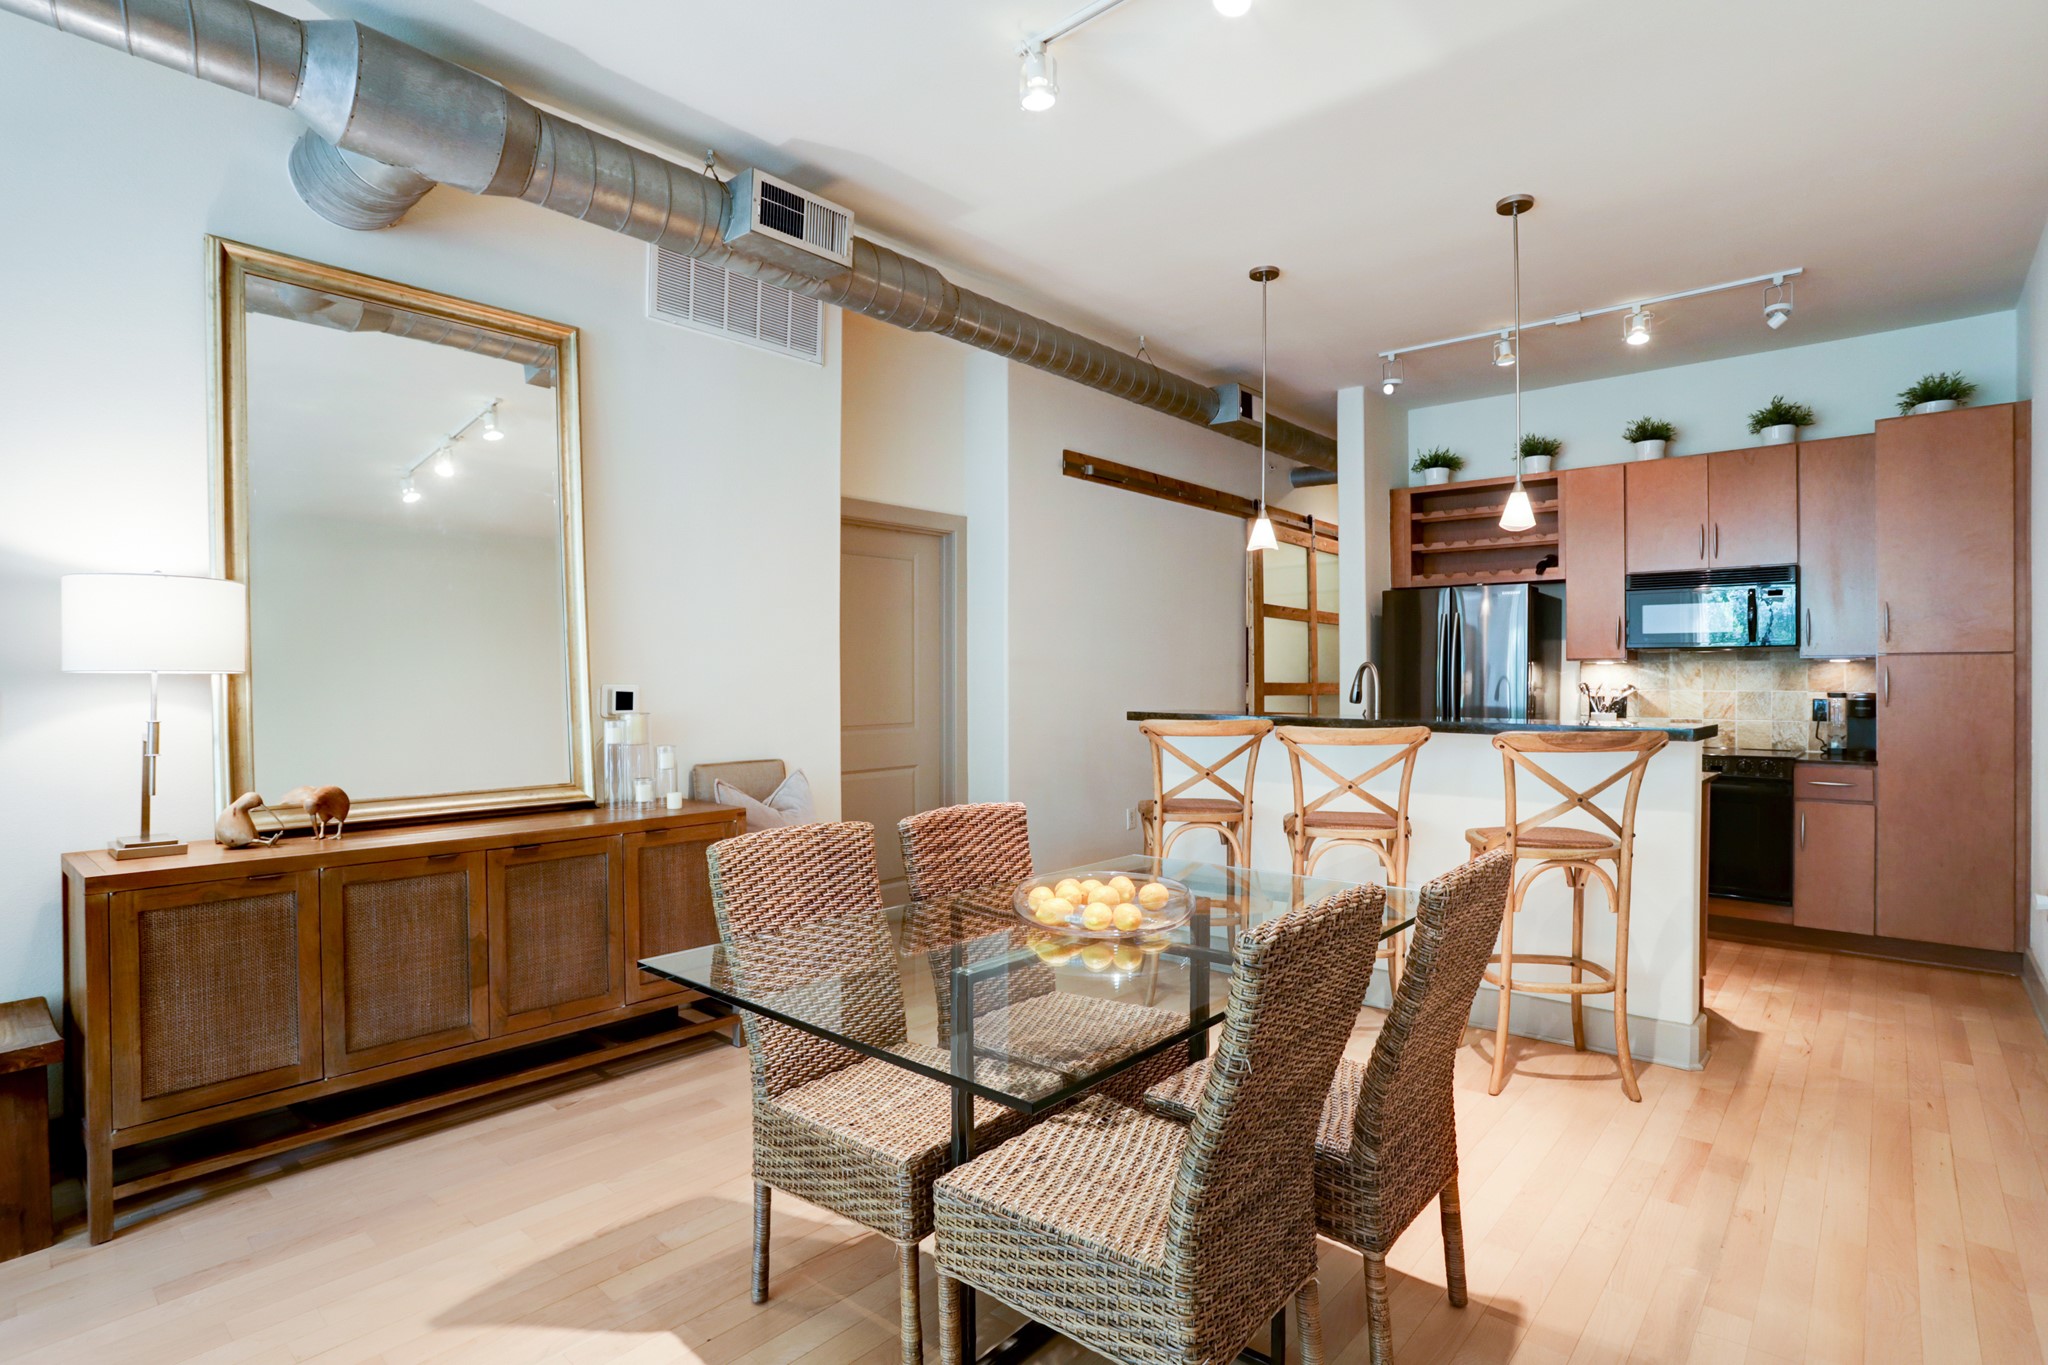 Welcome to 1901 Post Oak # 3209!  Beautiful views of the dining room open to the kitchen